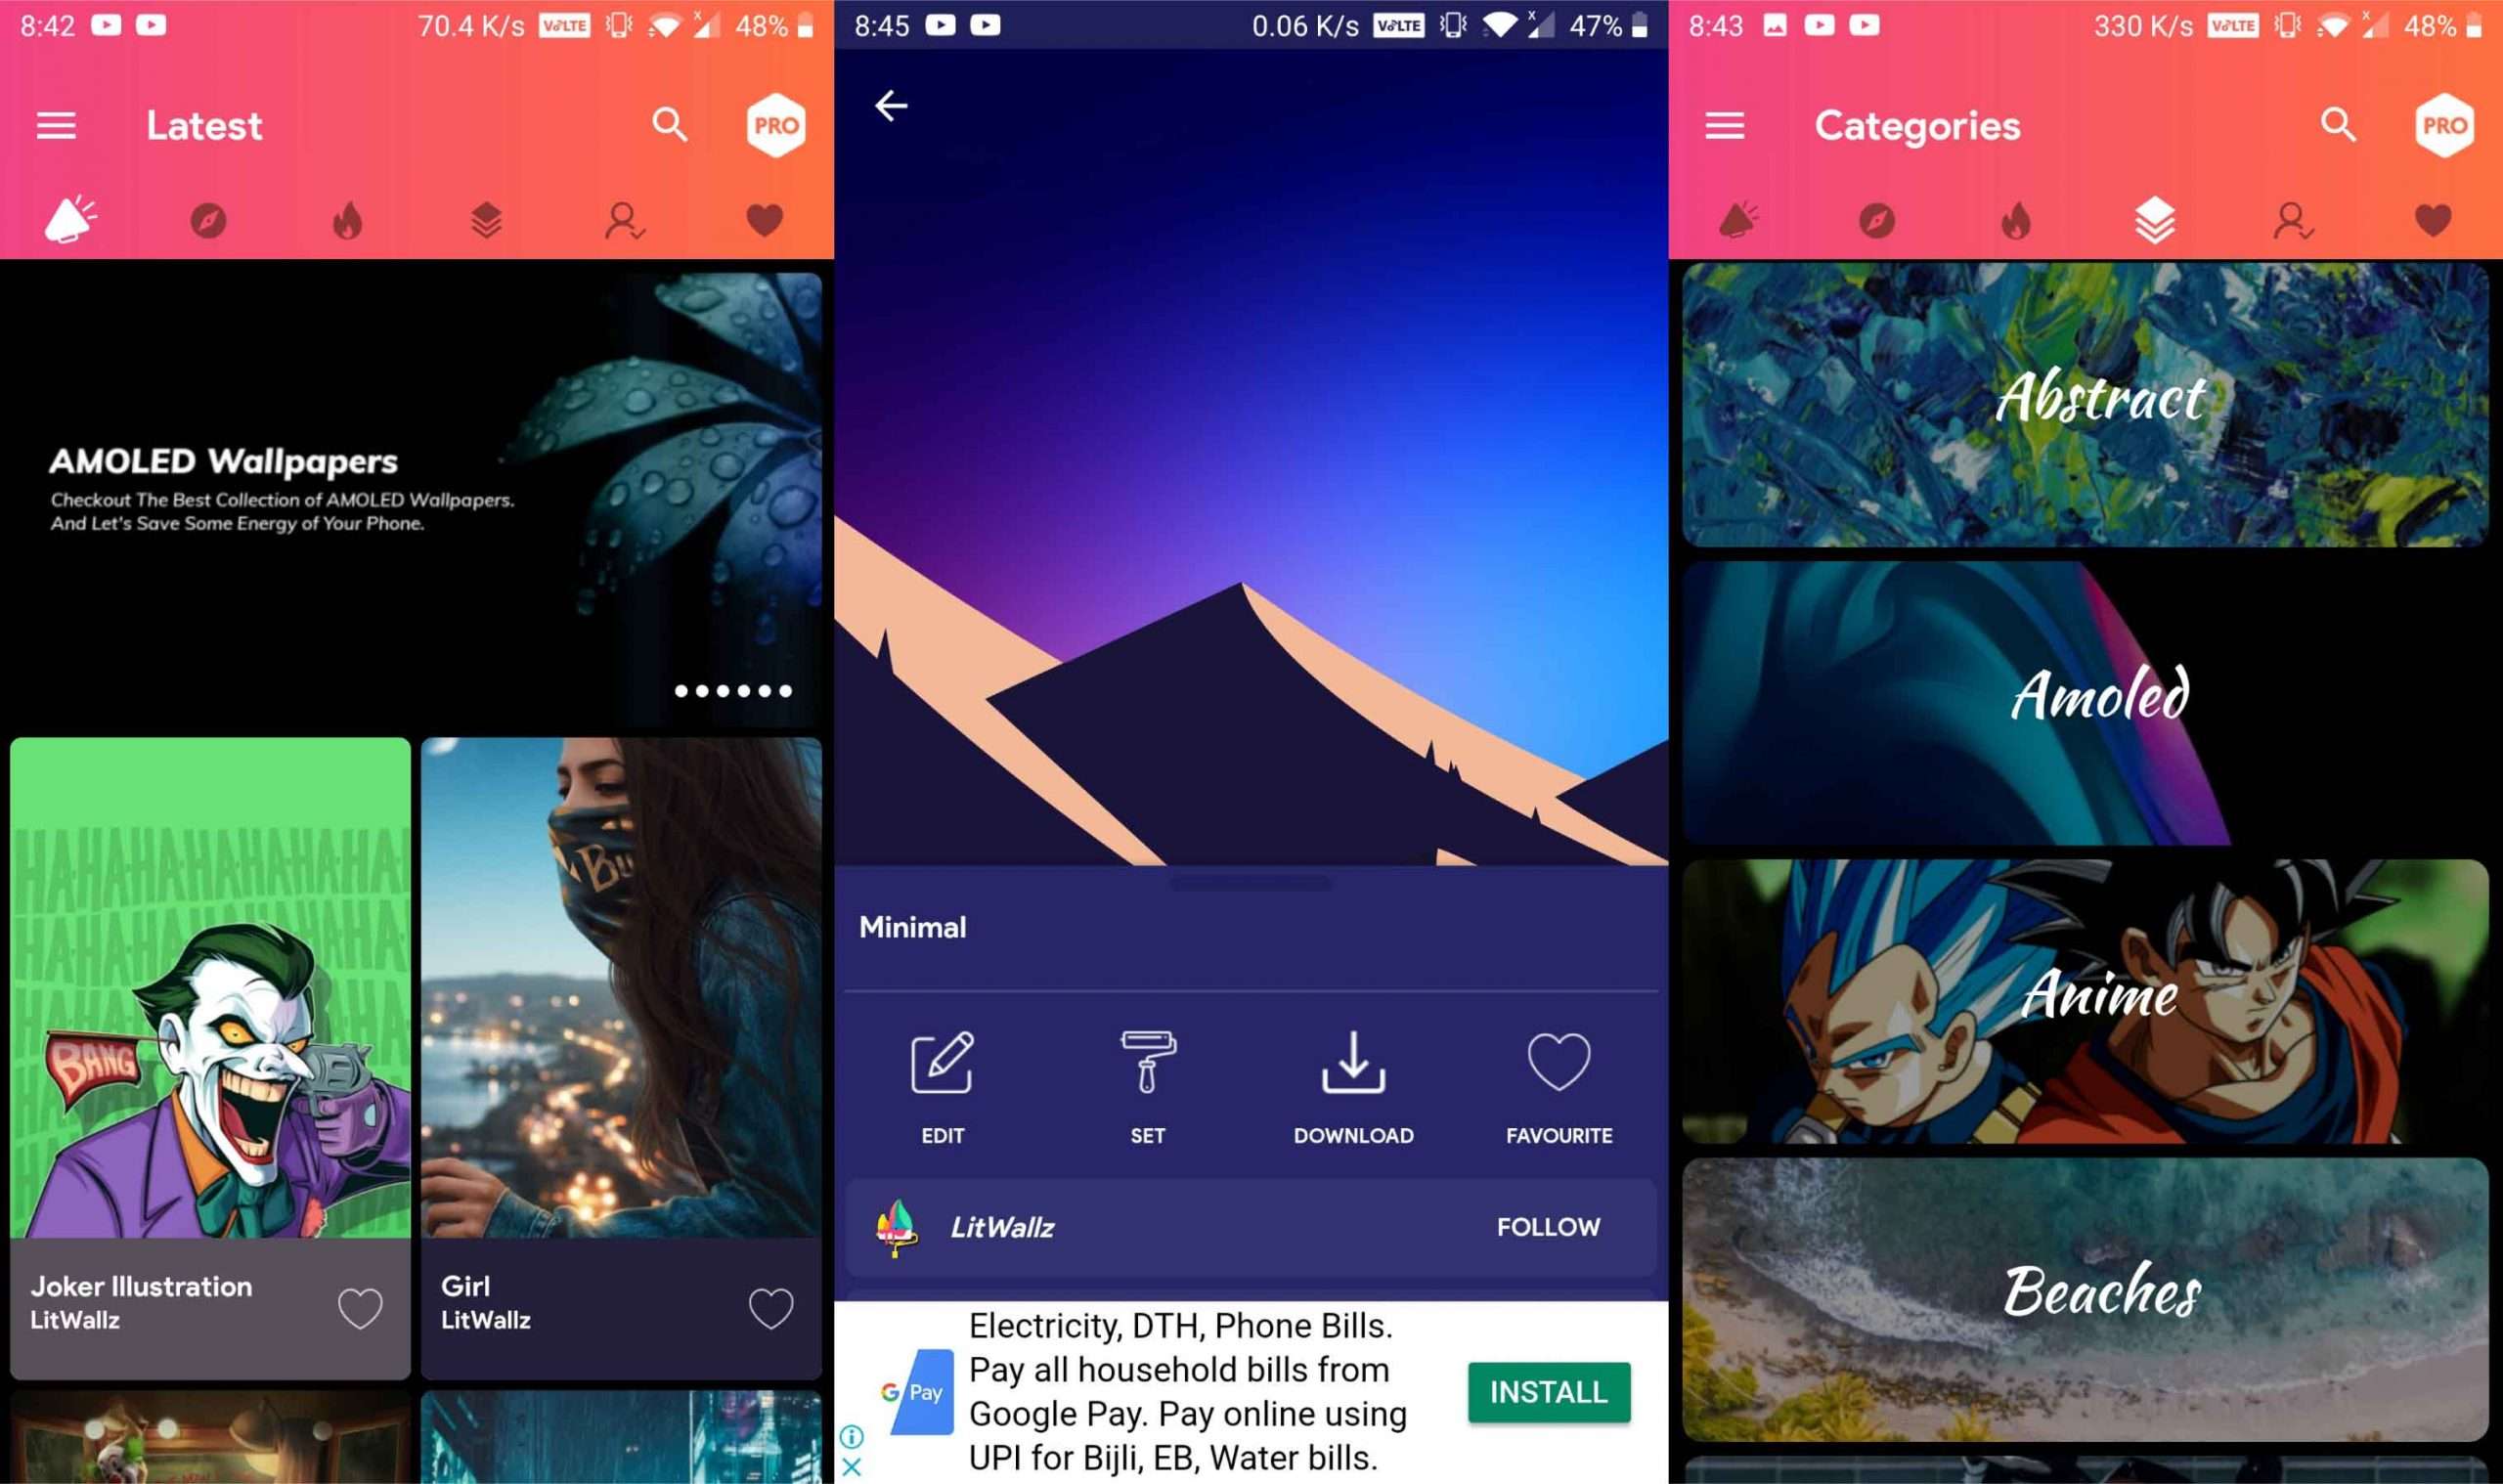 LitWallz: Best Android Apps (May 2020)